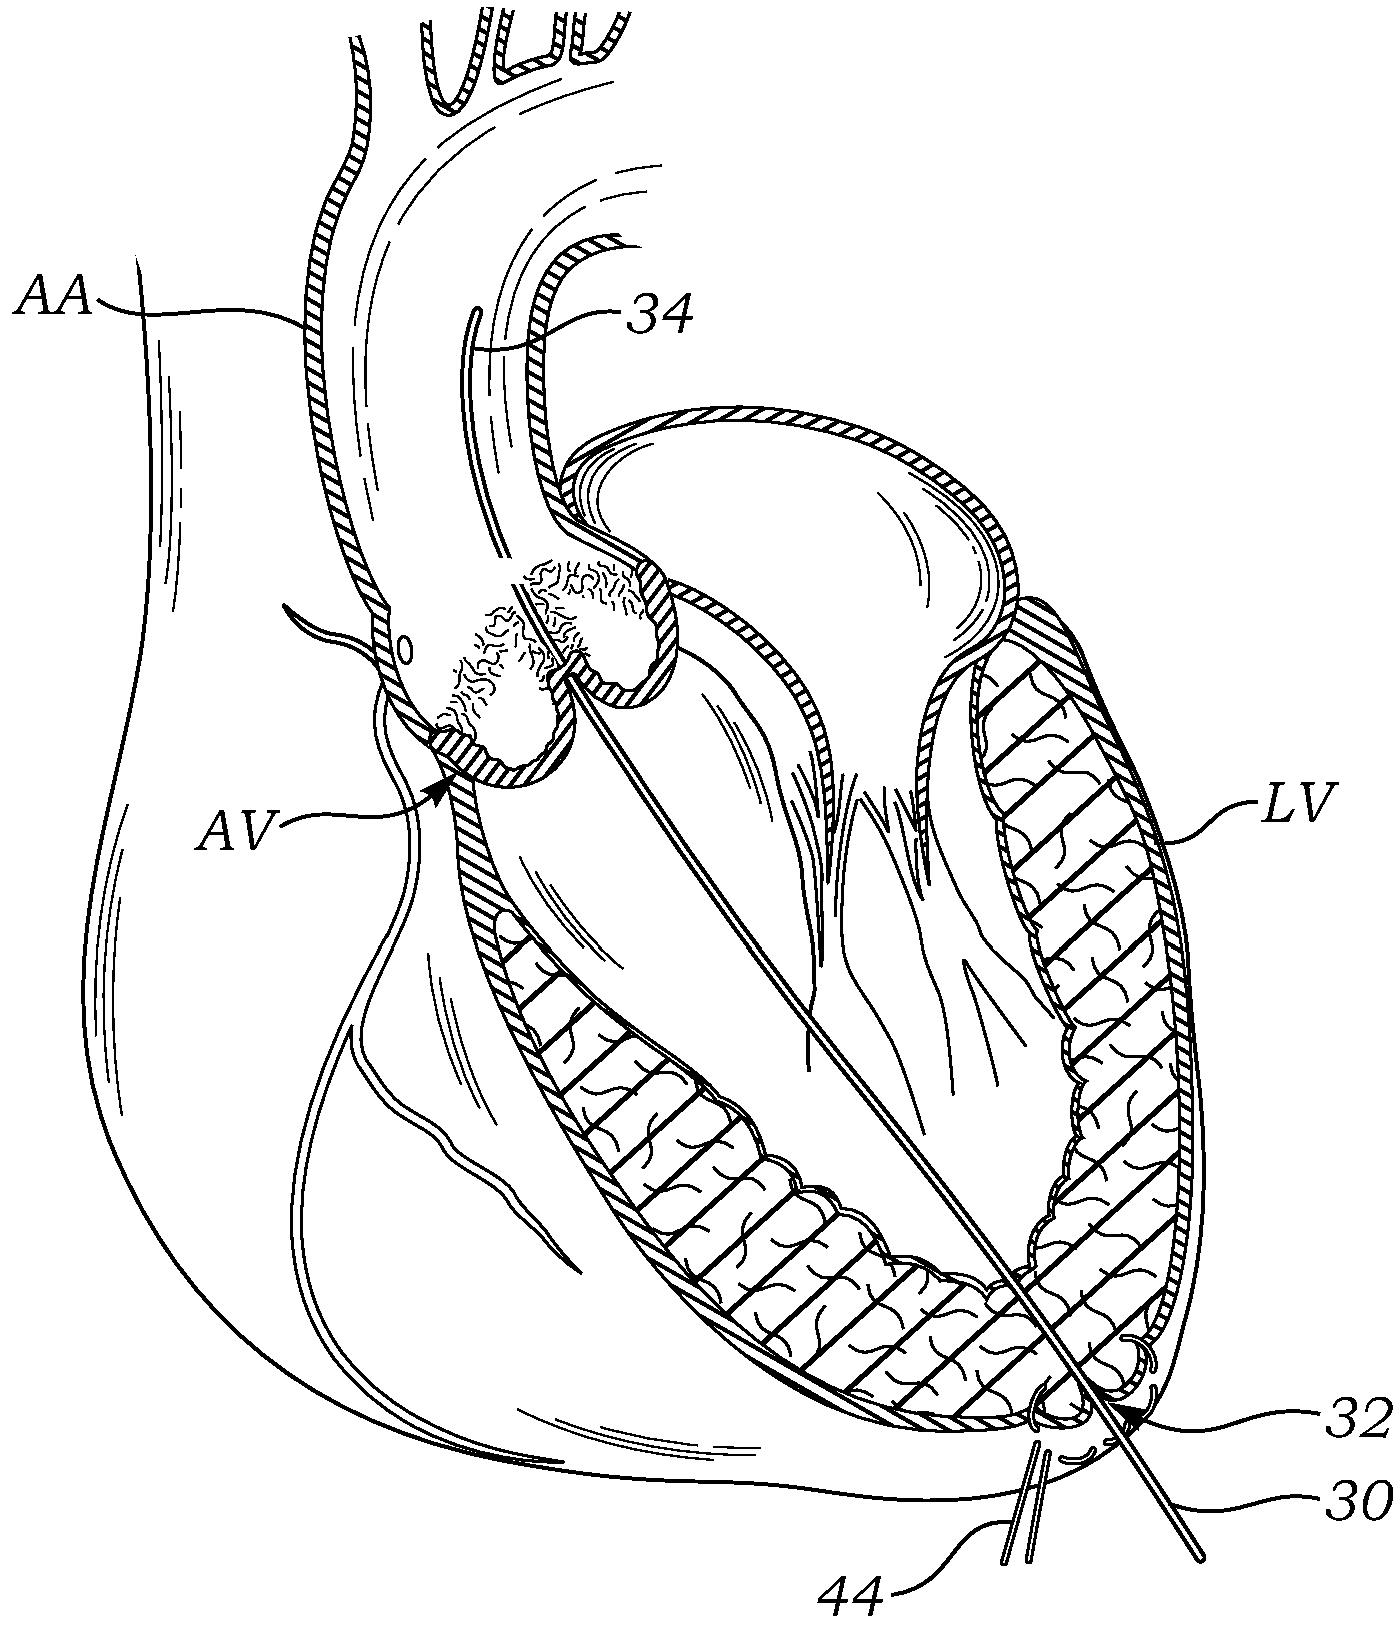 Transapical deliverry system for heart valves